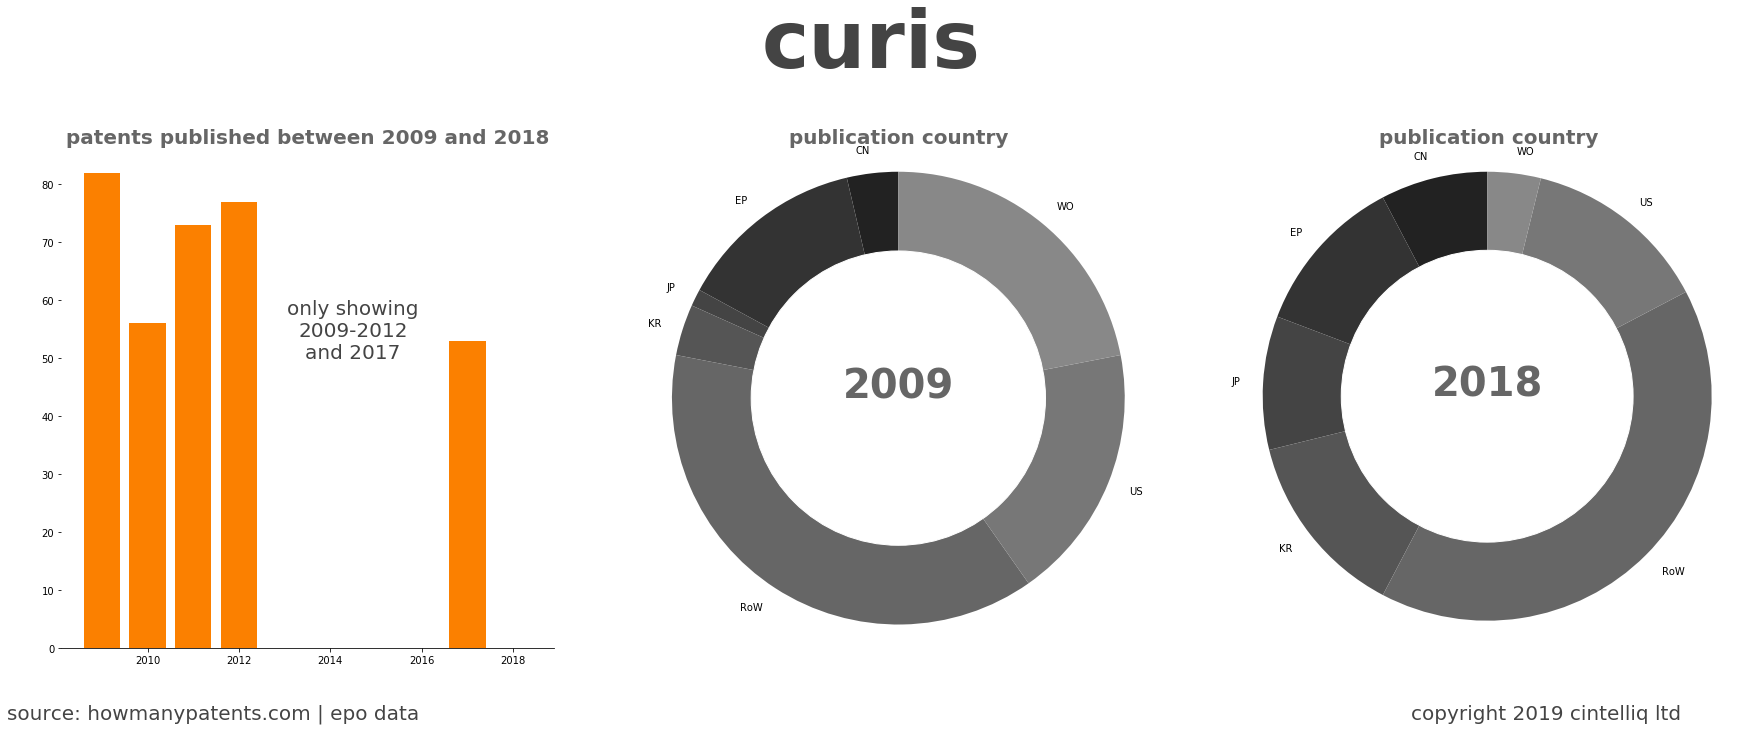 summary of patents for Curis